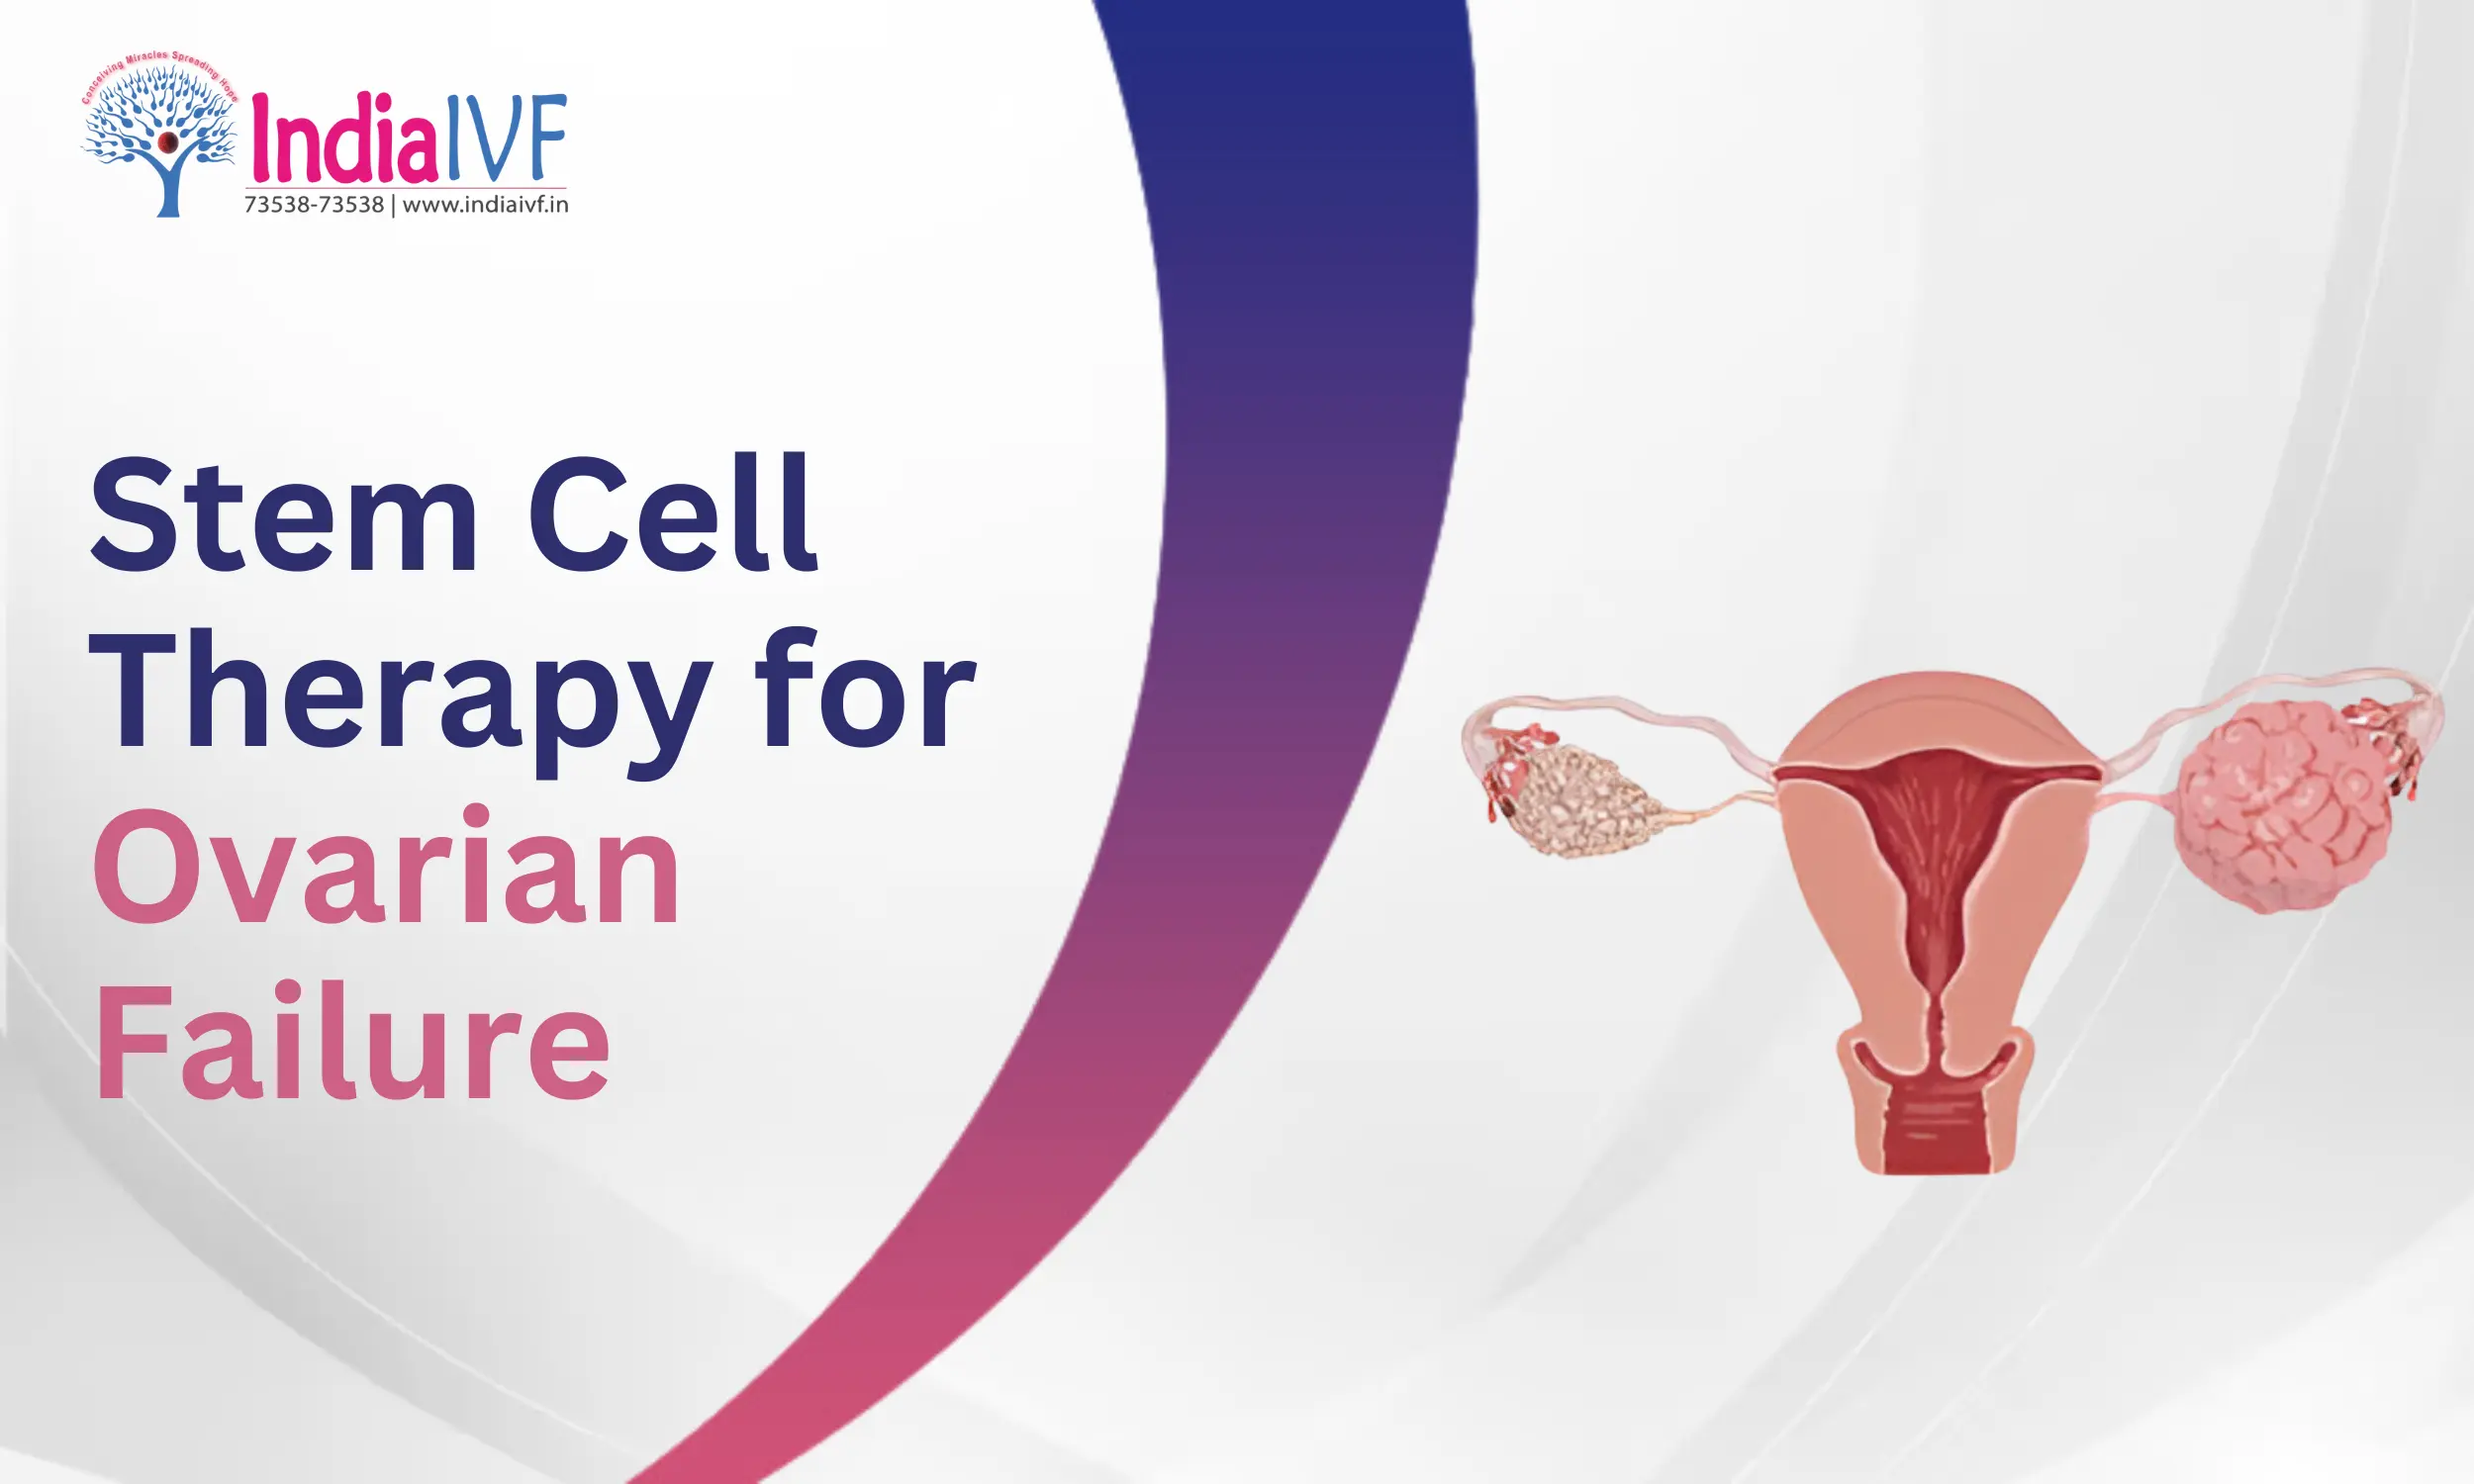 Stem Cell Therapy for Ovarian Failure